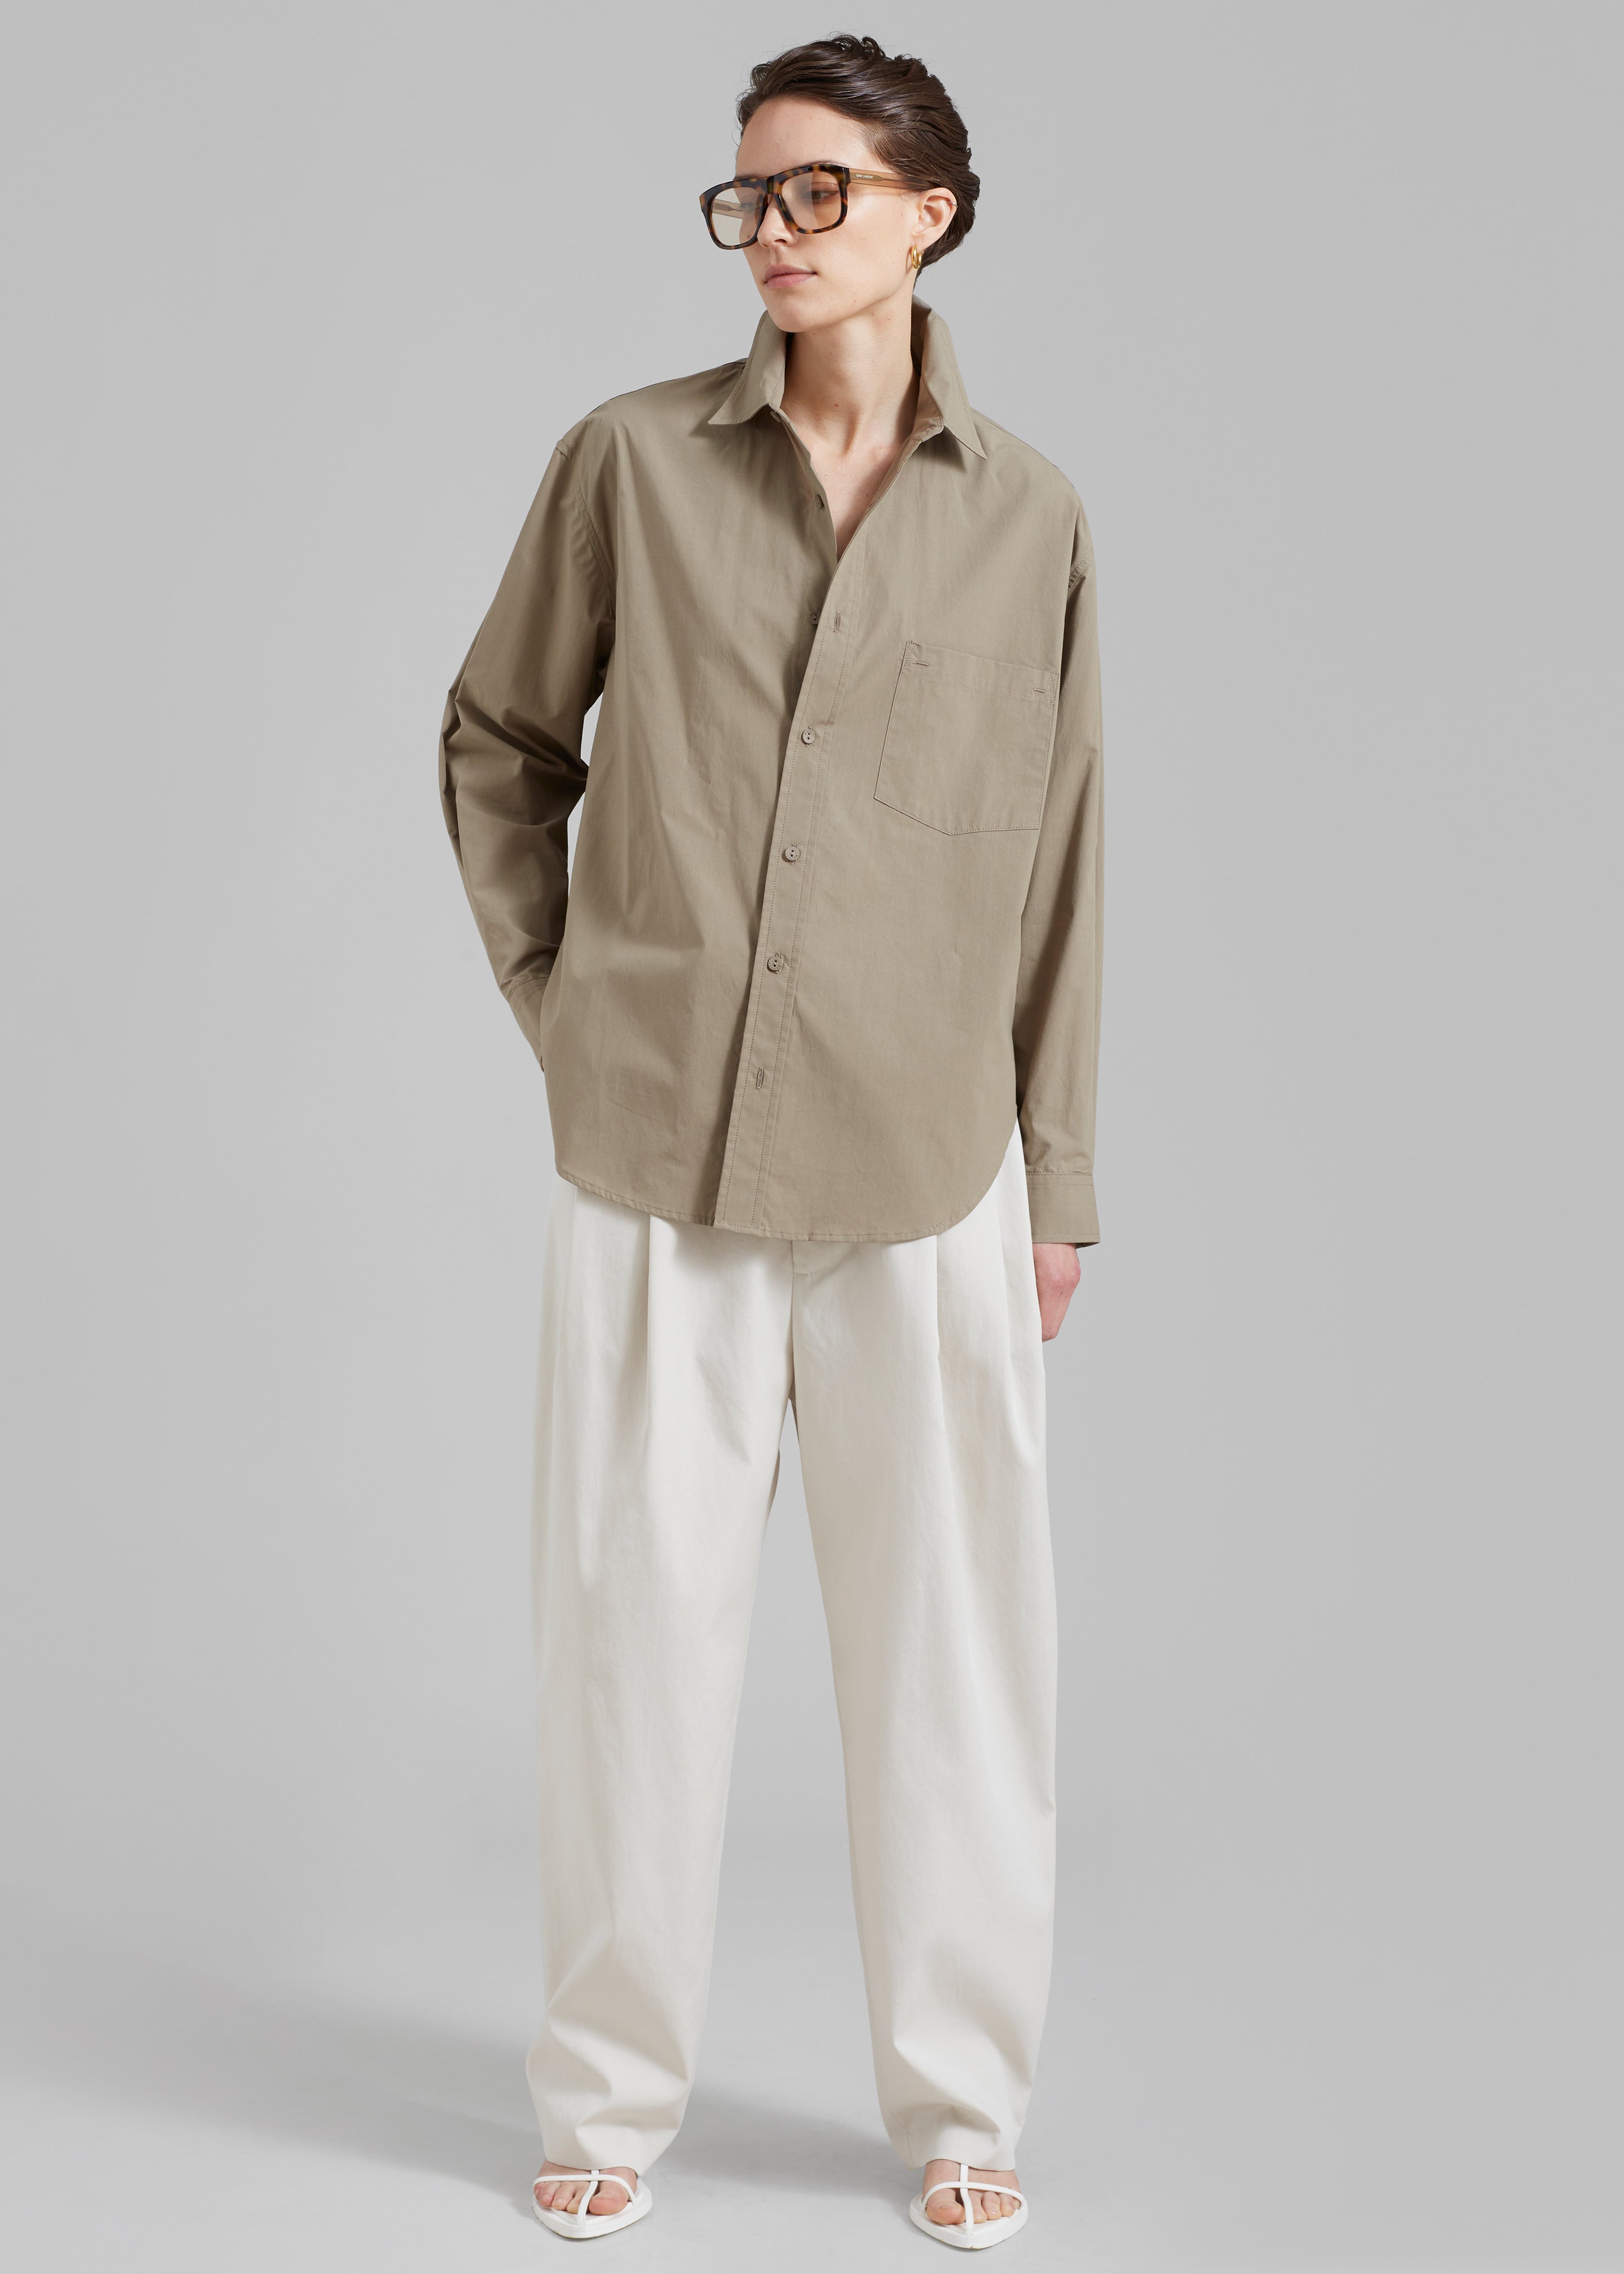 Matteau Relaxed Shirt - Taupe - 3